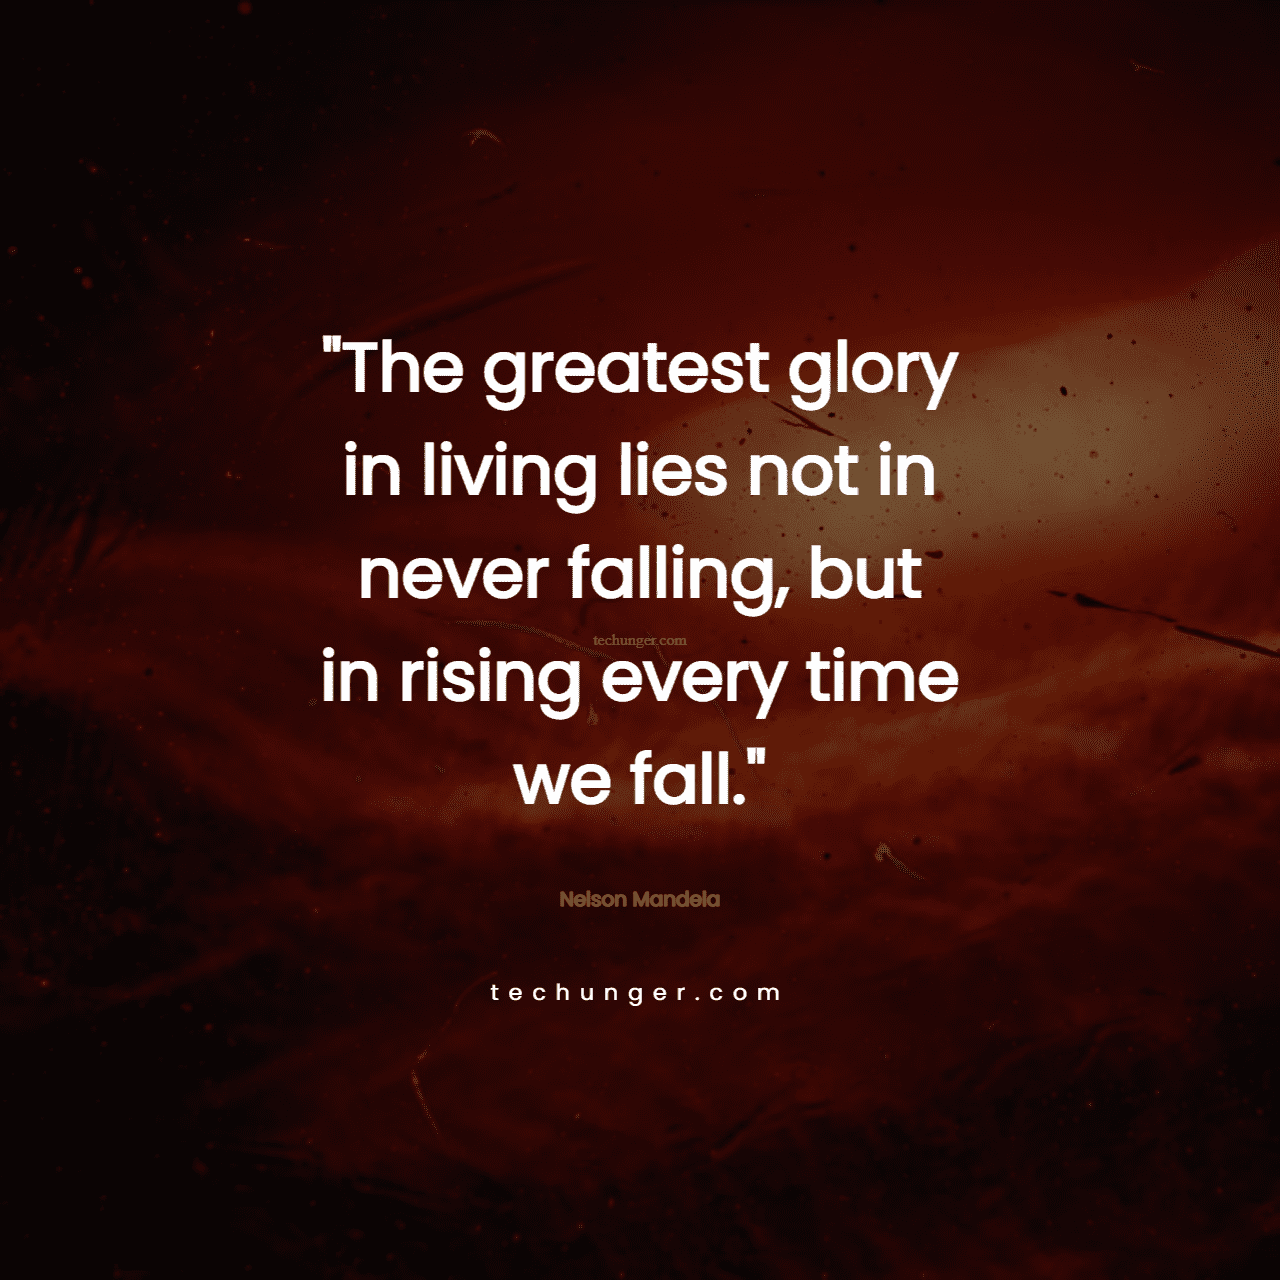 motivational,inspirational,quotes,The greatest glory in living lies not in never falling, but in rising every time we fall.
Nelson Mandela